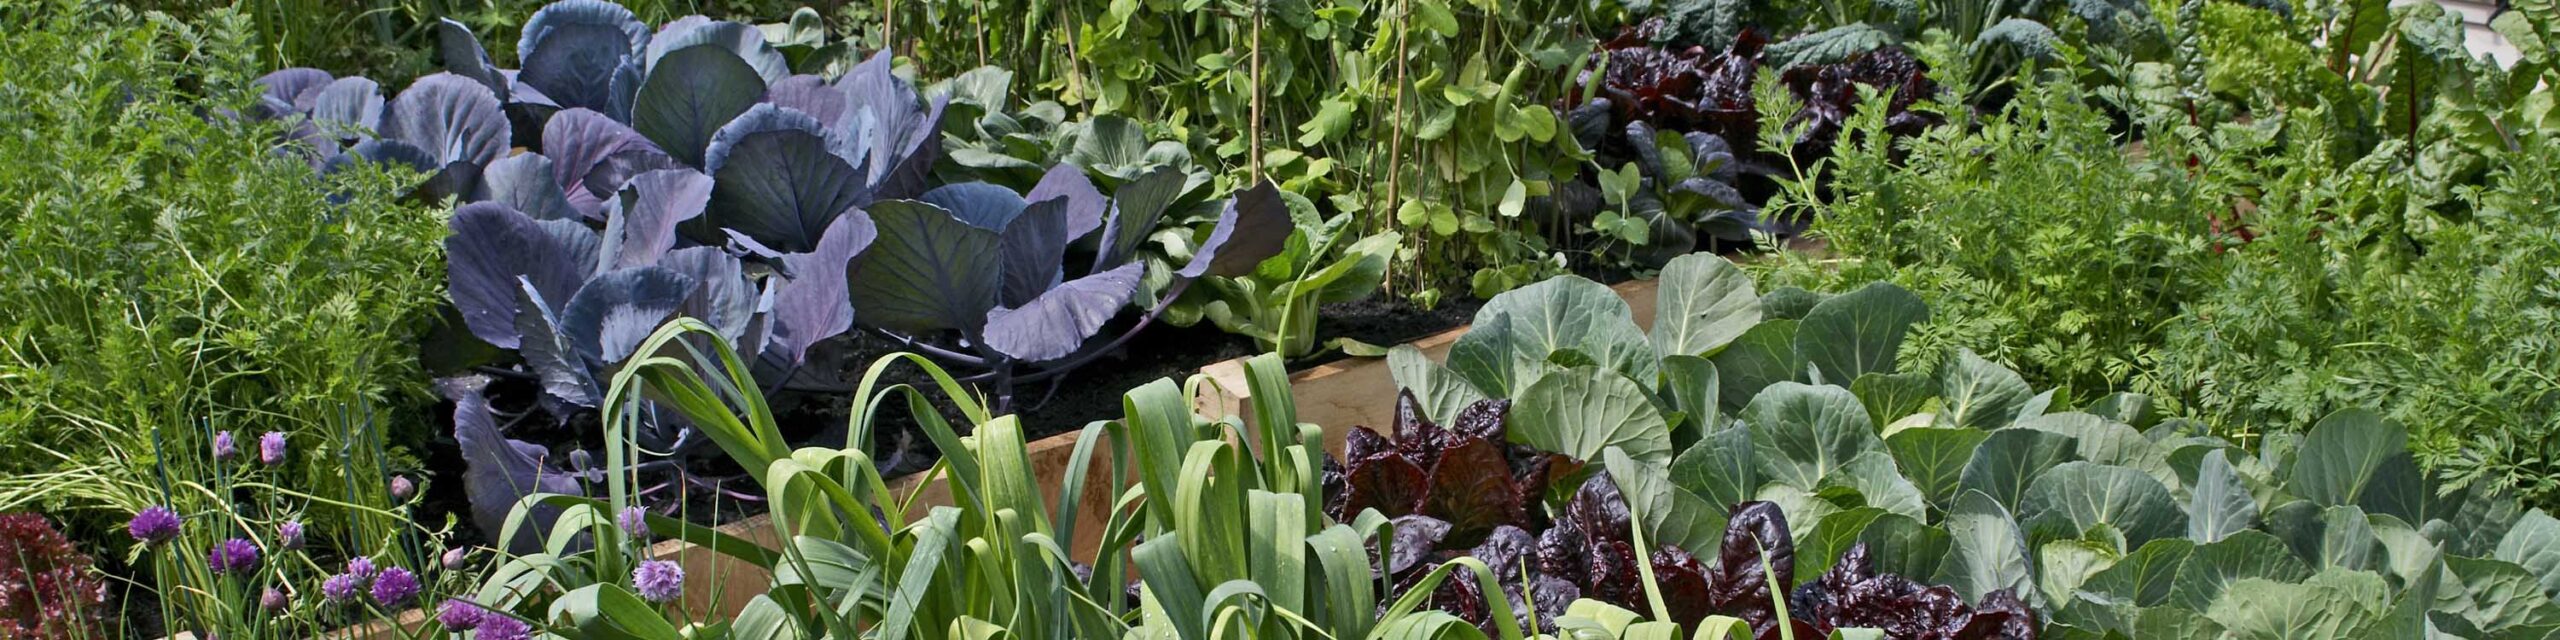 Cropped in of a raised bed garden featuring a plethora of vegetable plants.